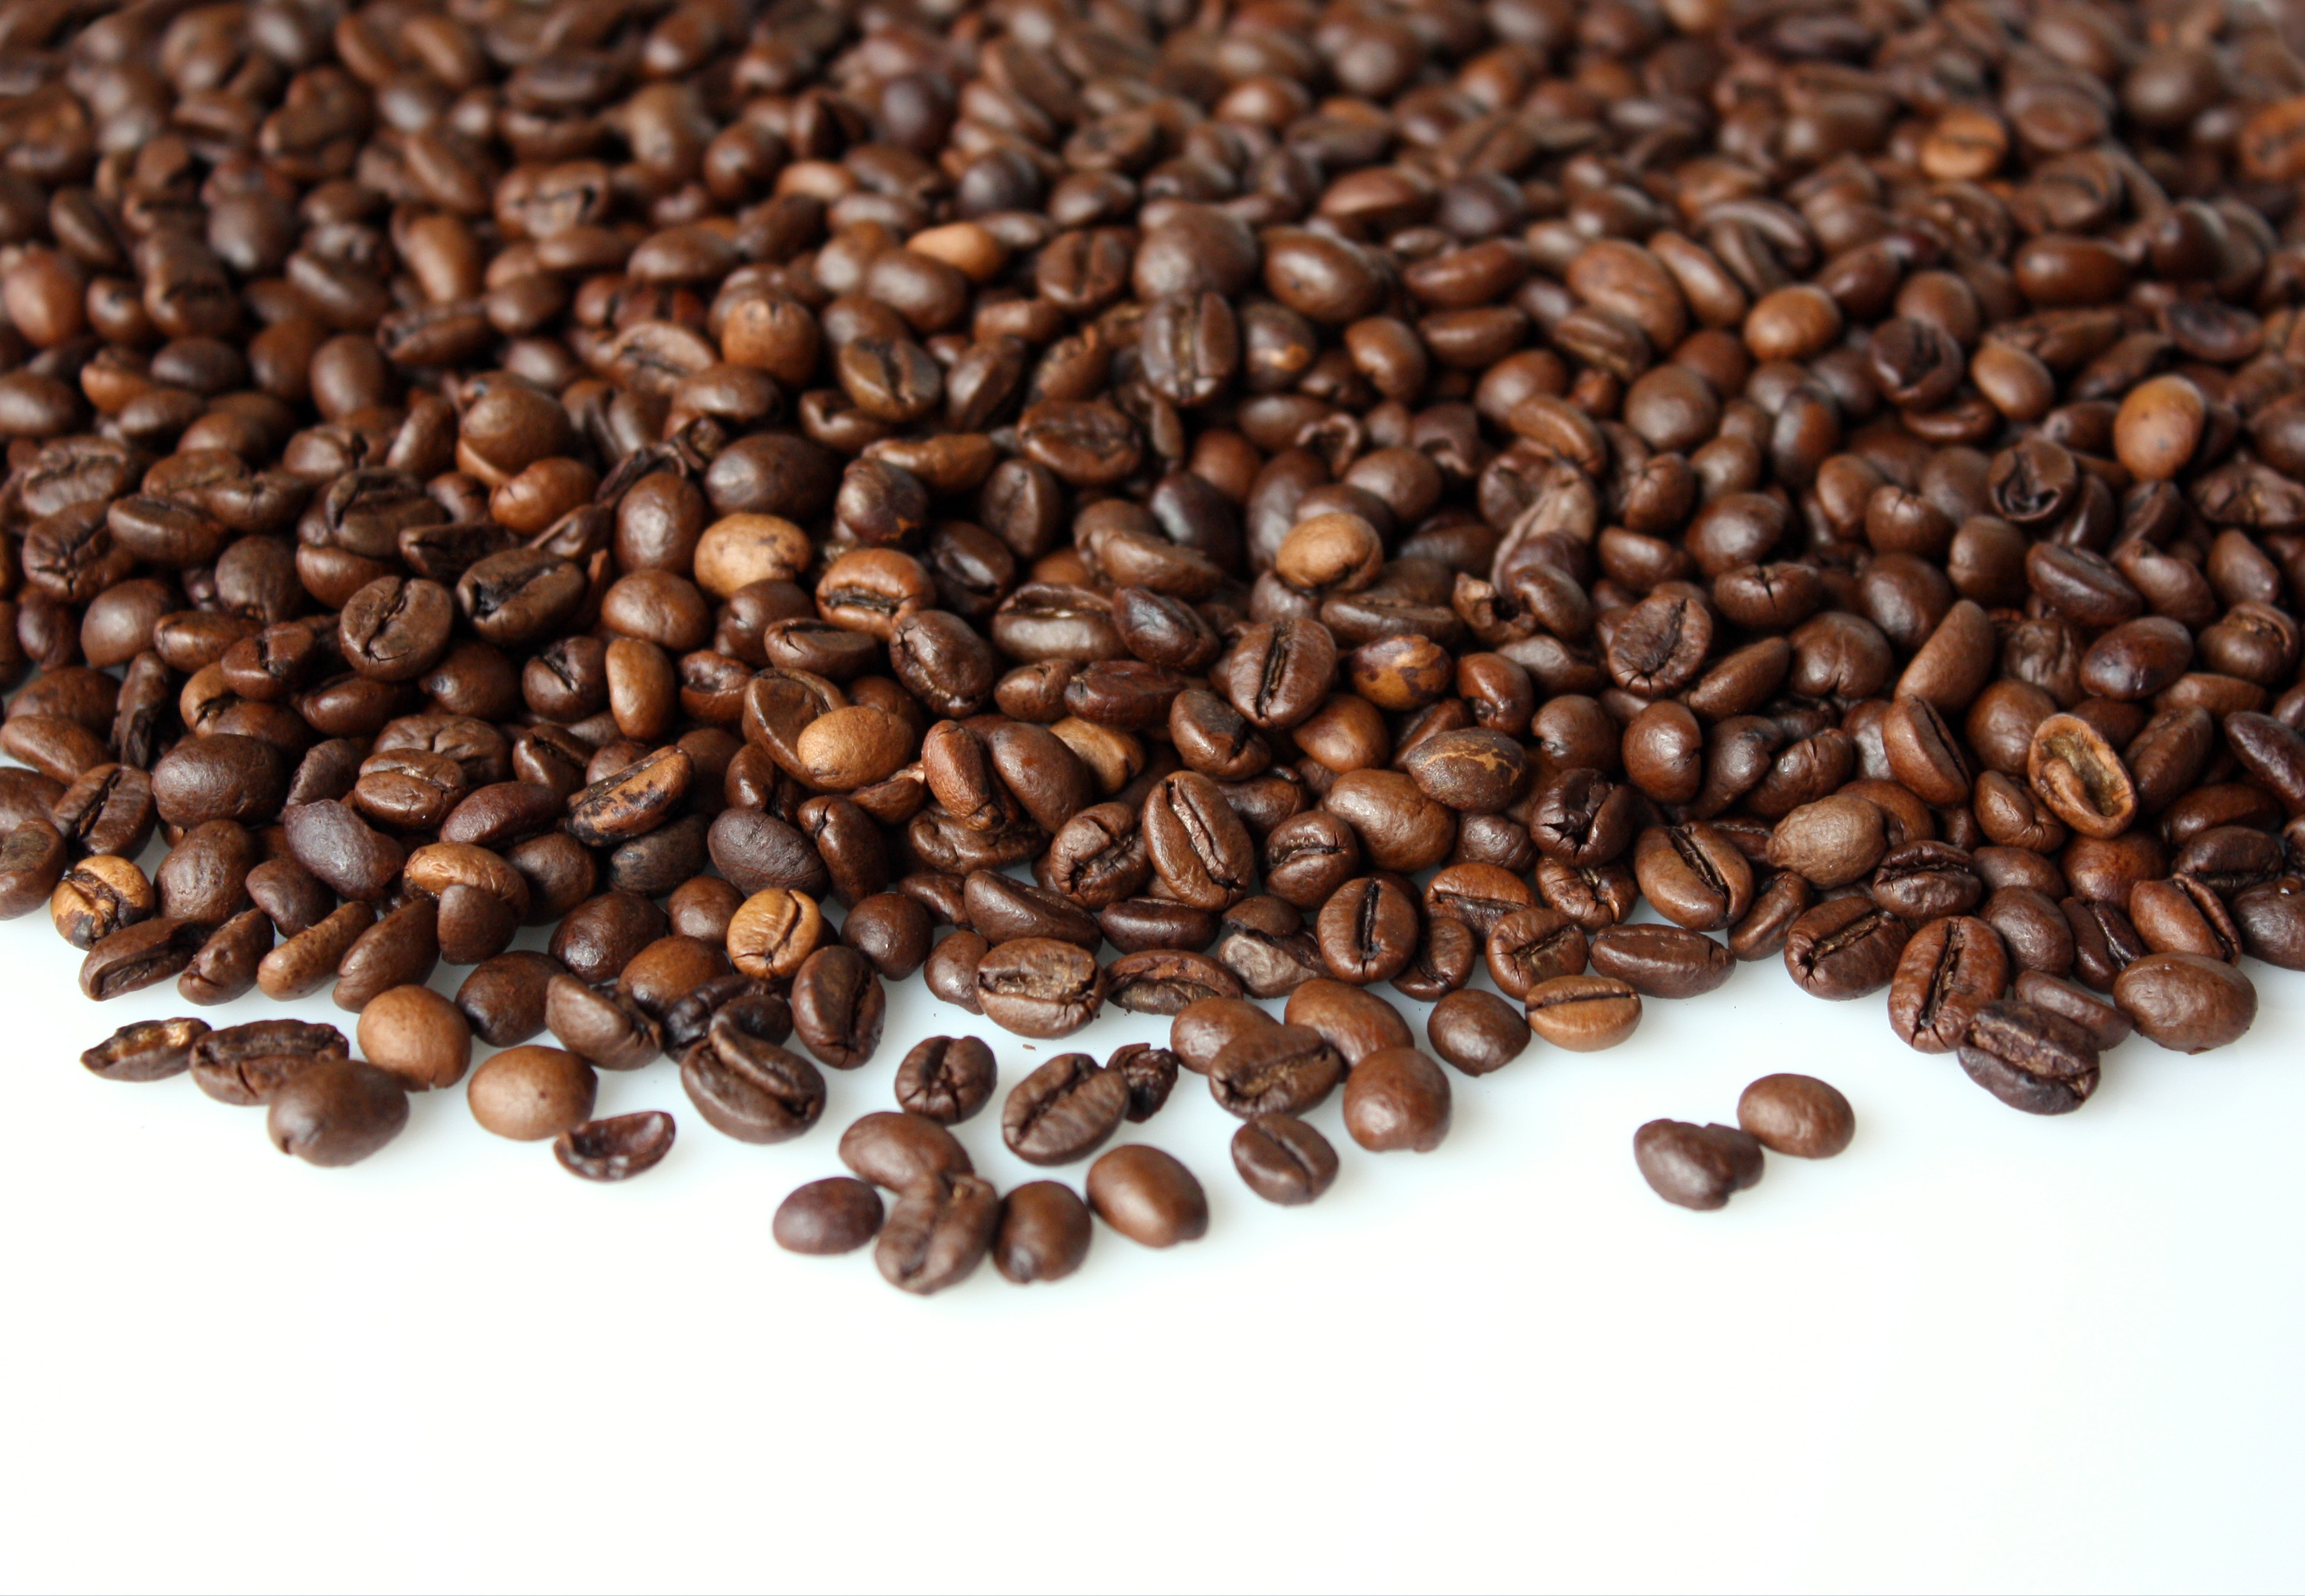 Brown coffee beans on a white background free image